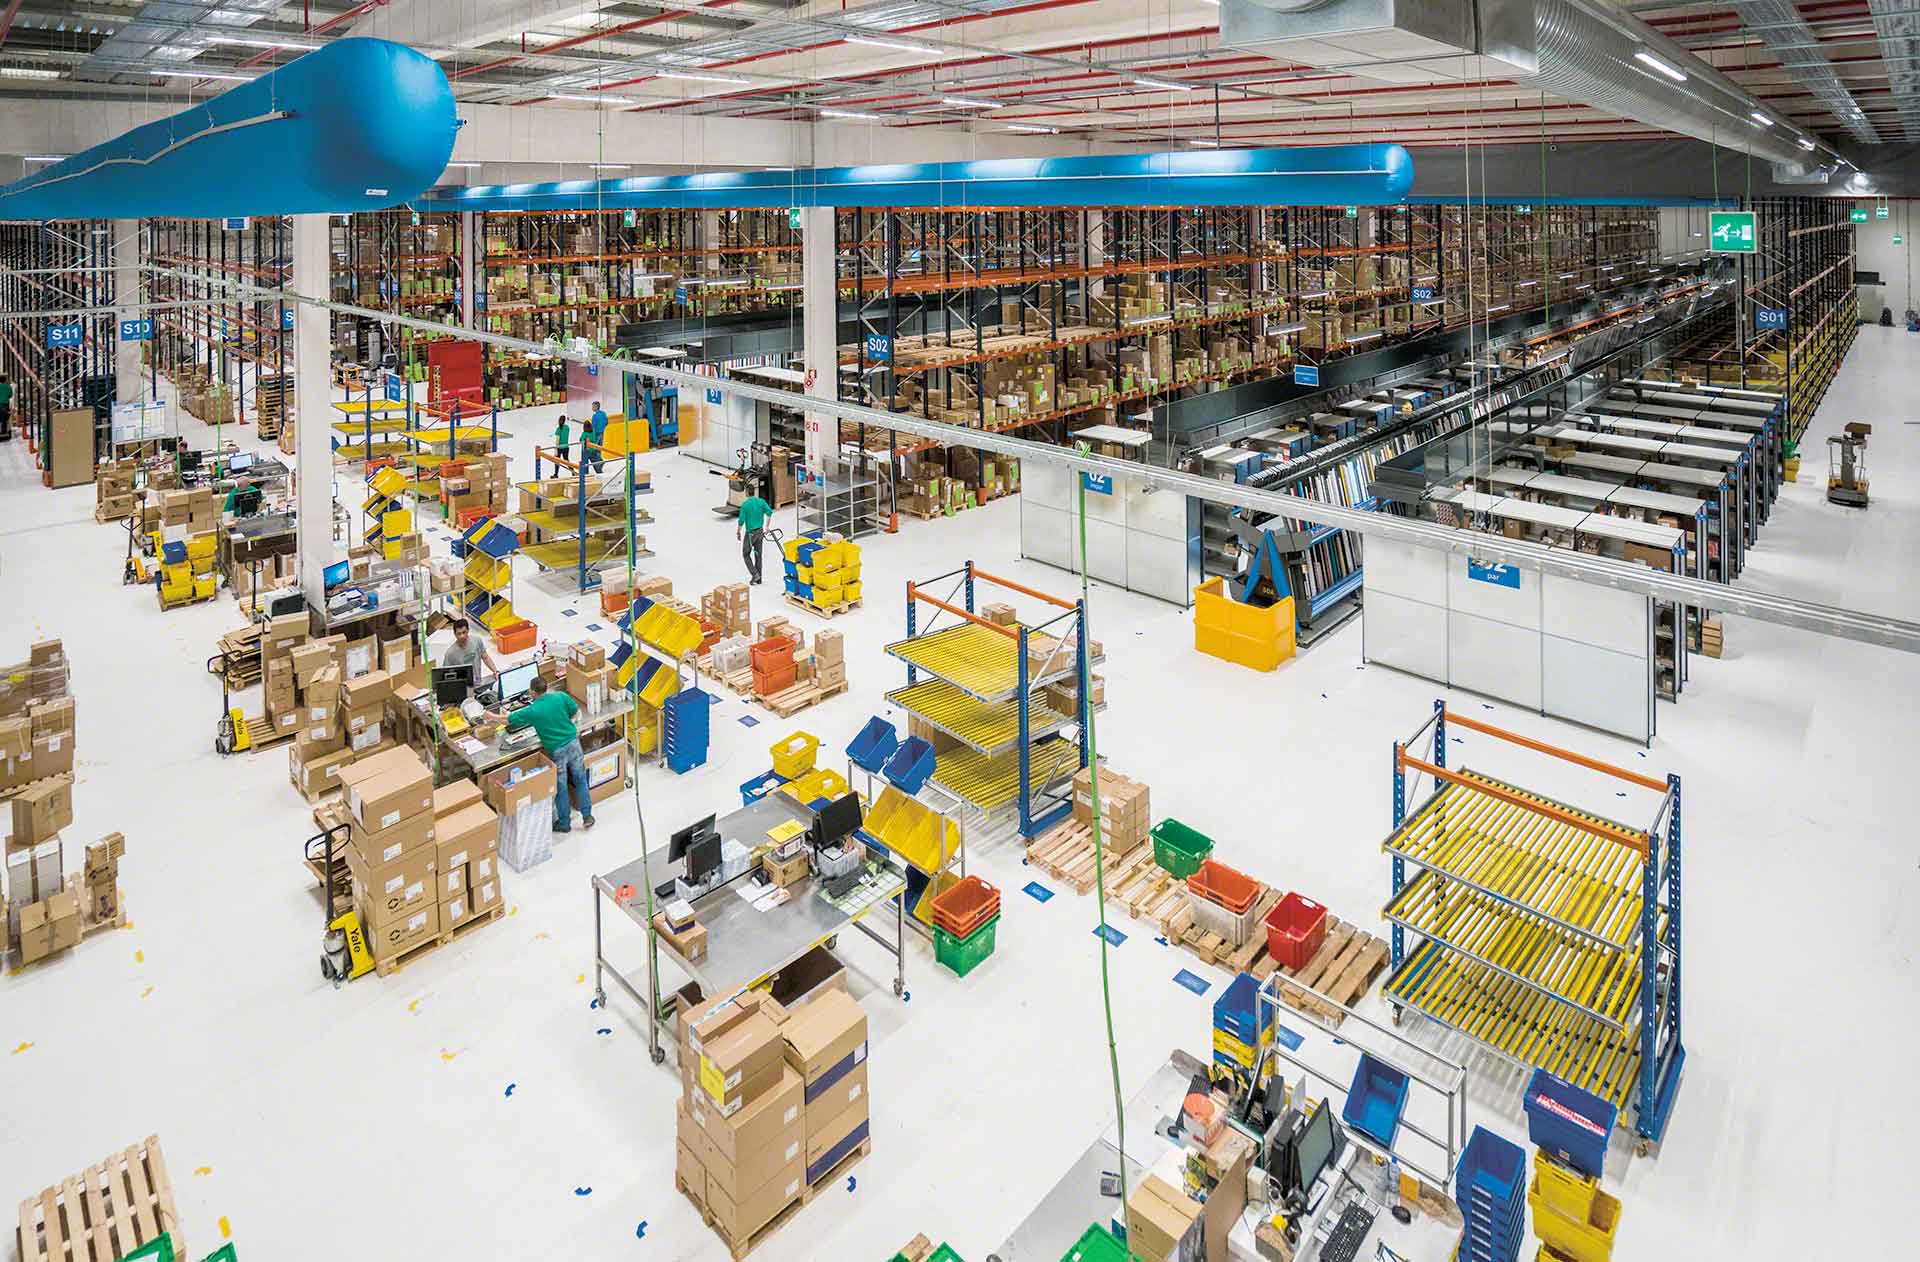 Operators perform product picking and packing tasks in the warehouse